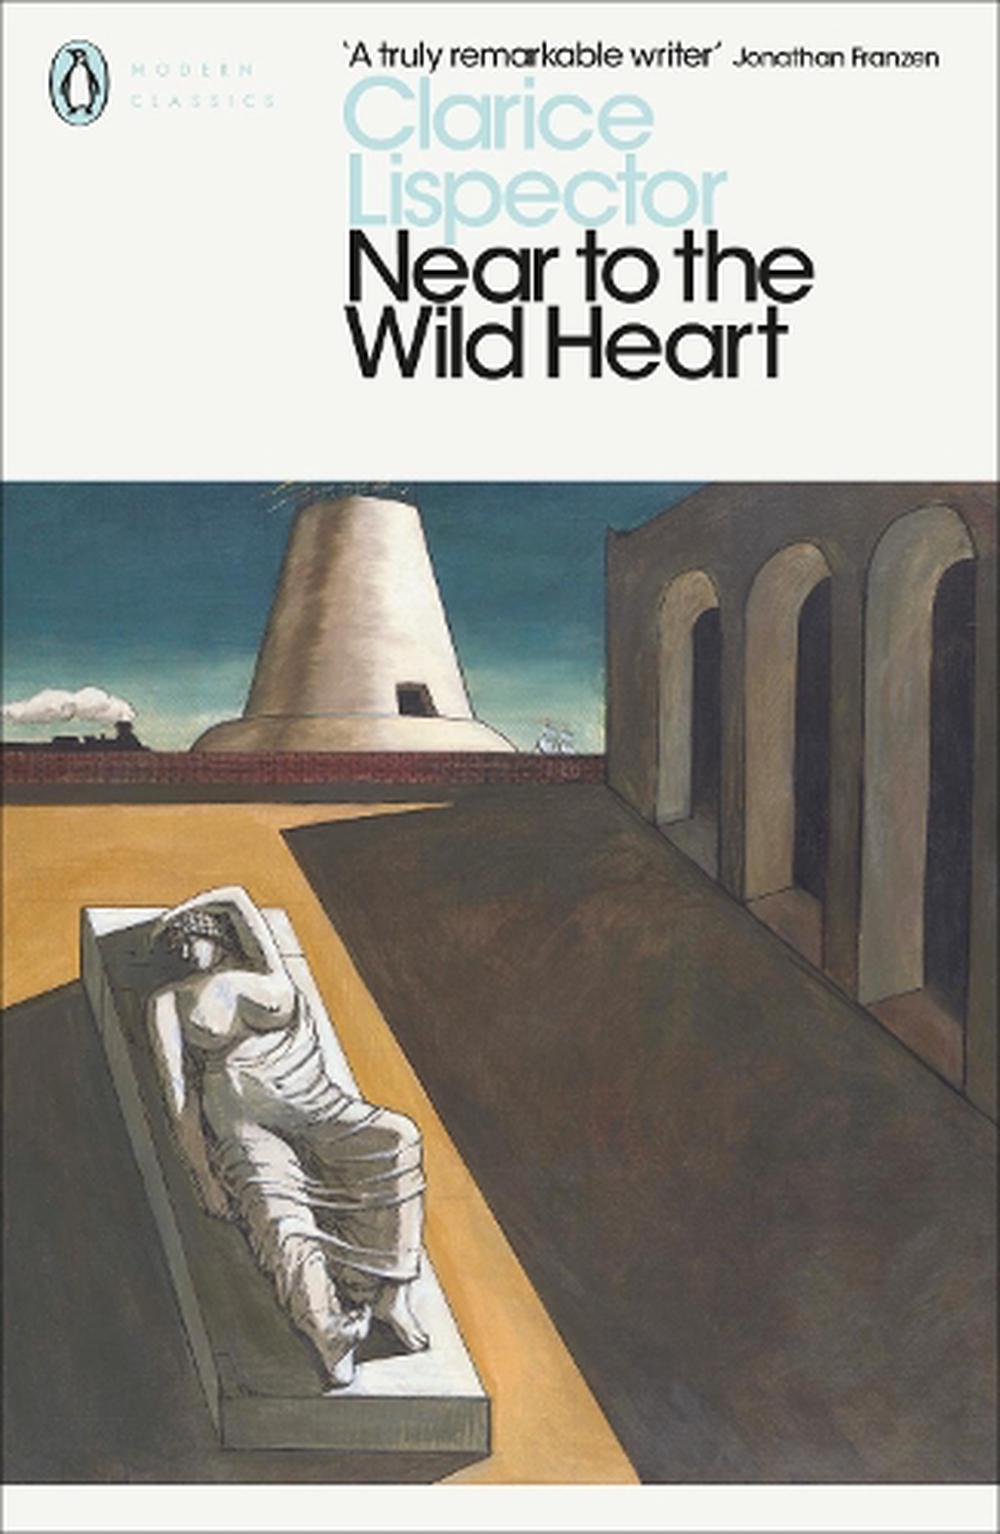 quotes from wild at heart book